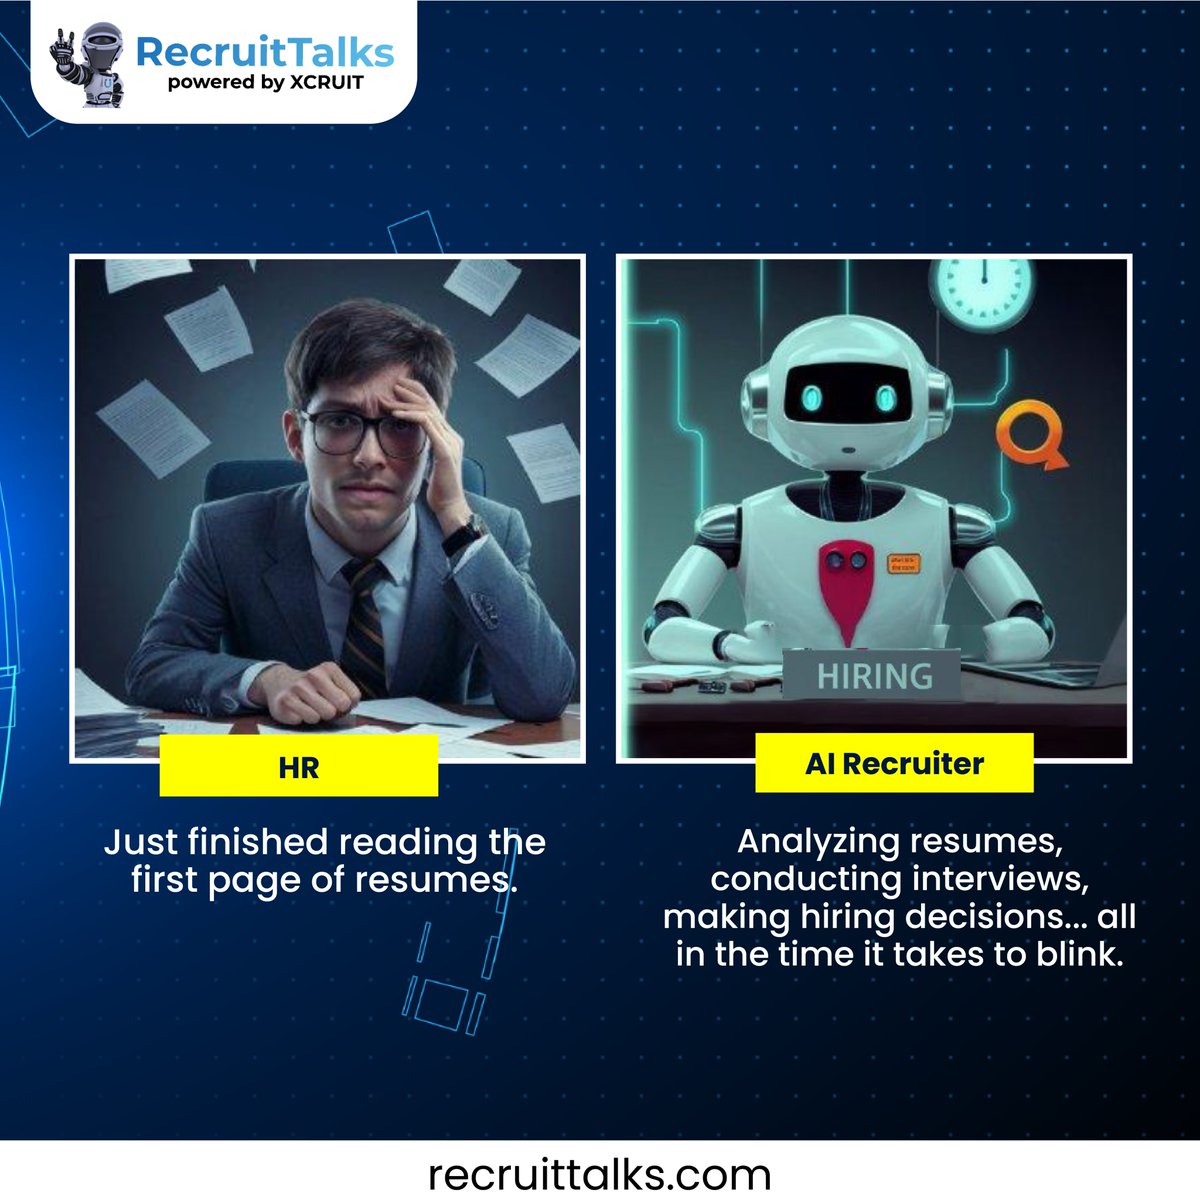 Who wins every time? Place Your Bets Now!😄
.
.
.
#Recruitorr #IamRecruitorr #MemesDaily #ArtificialIntelligence